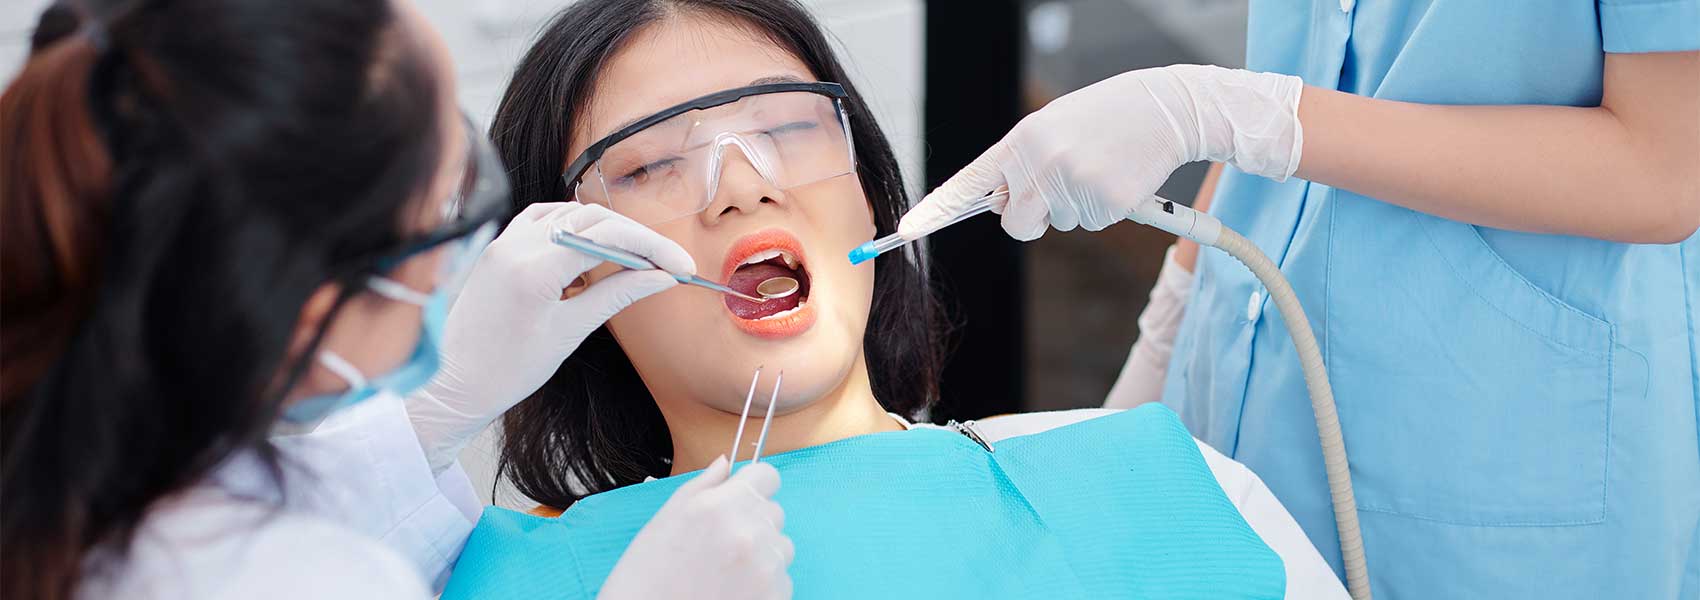 Dentist perform the dental treatments for her patient